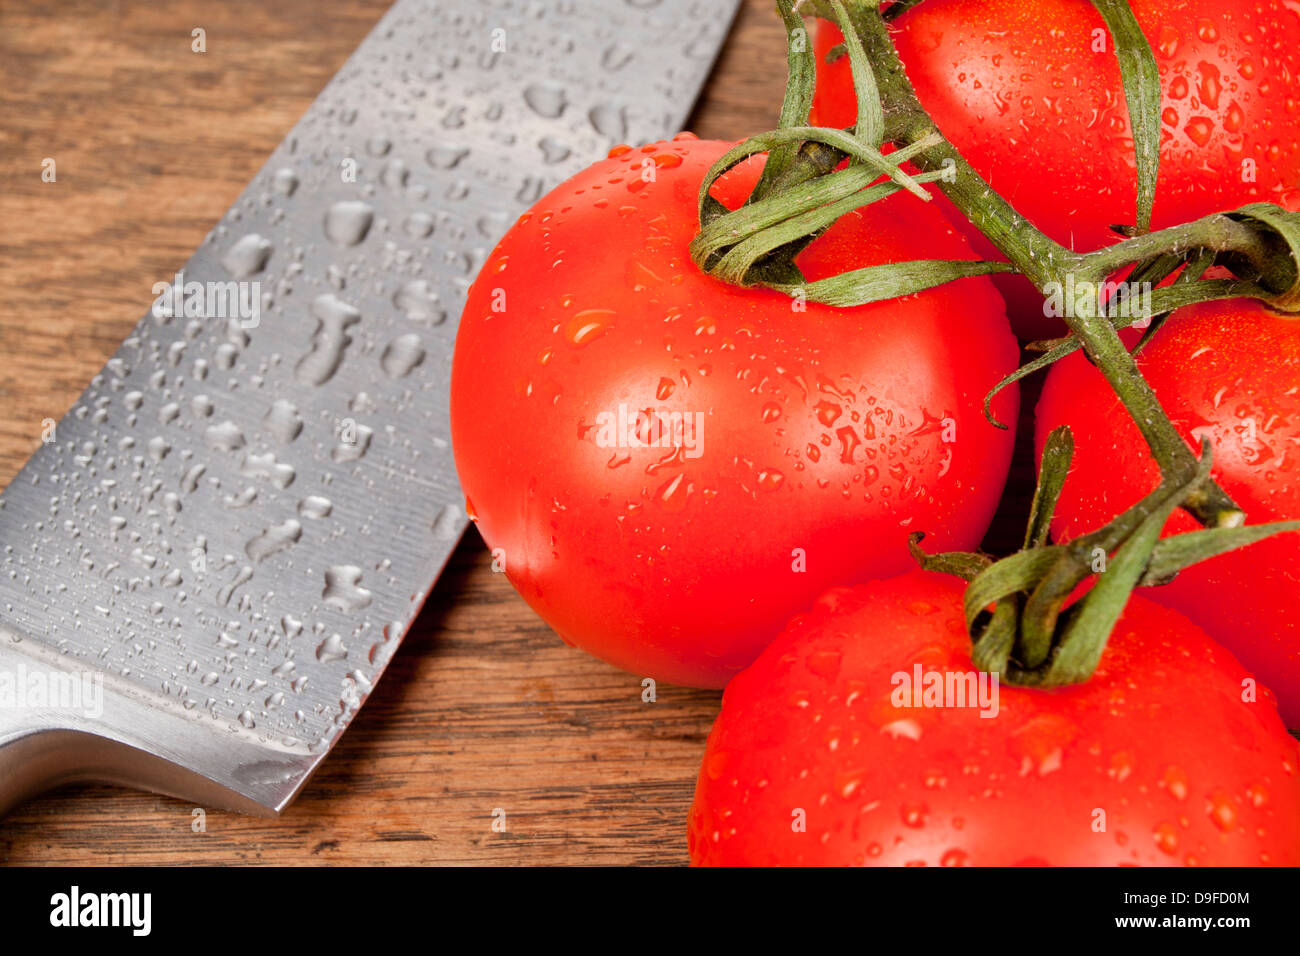 Shrub tomatoes with a knife Tomatoes with a knife Stock Photo